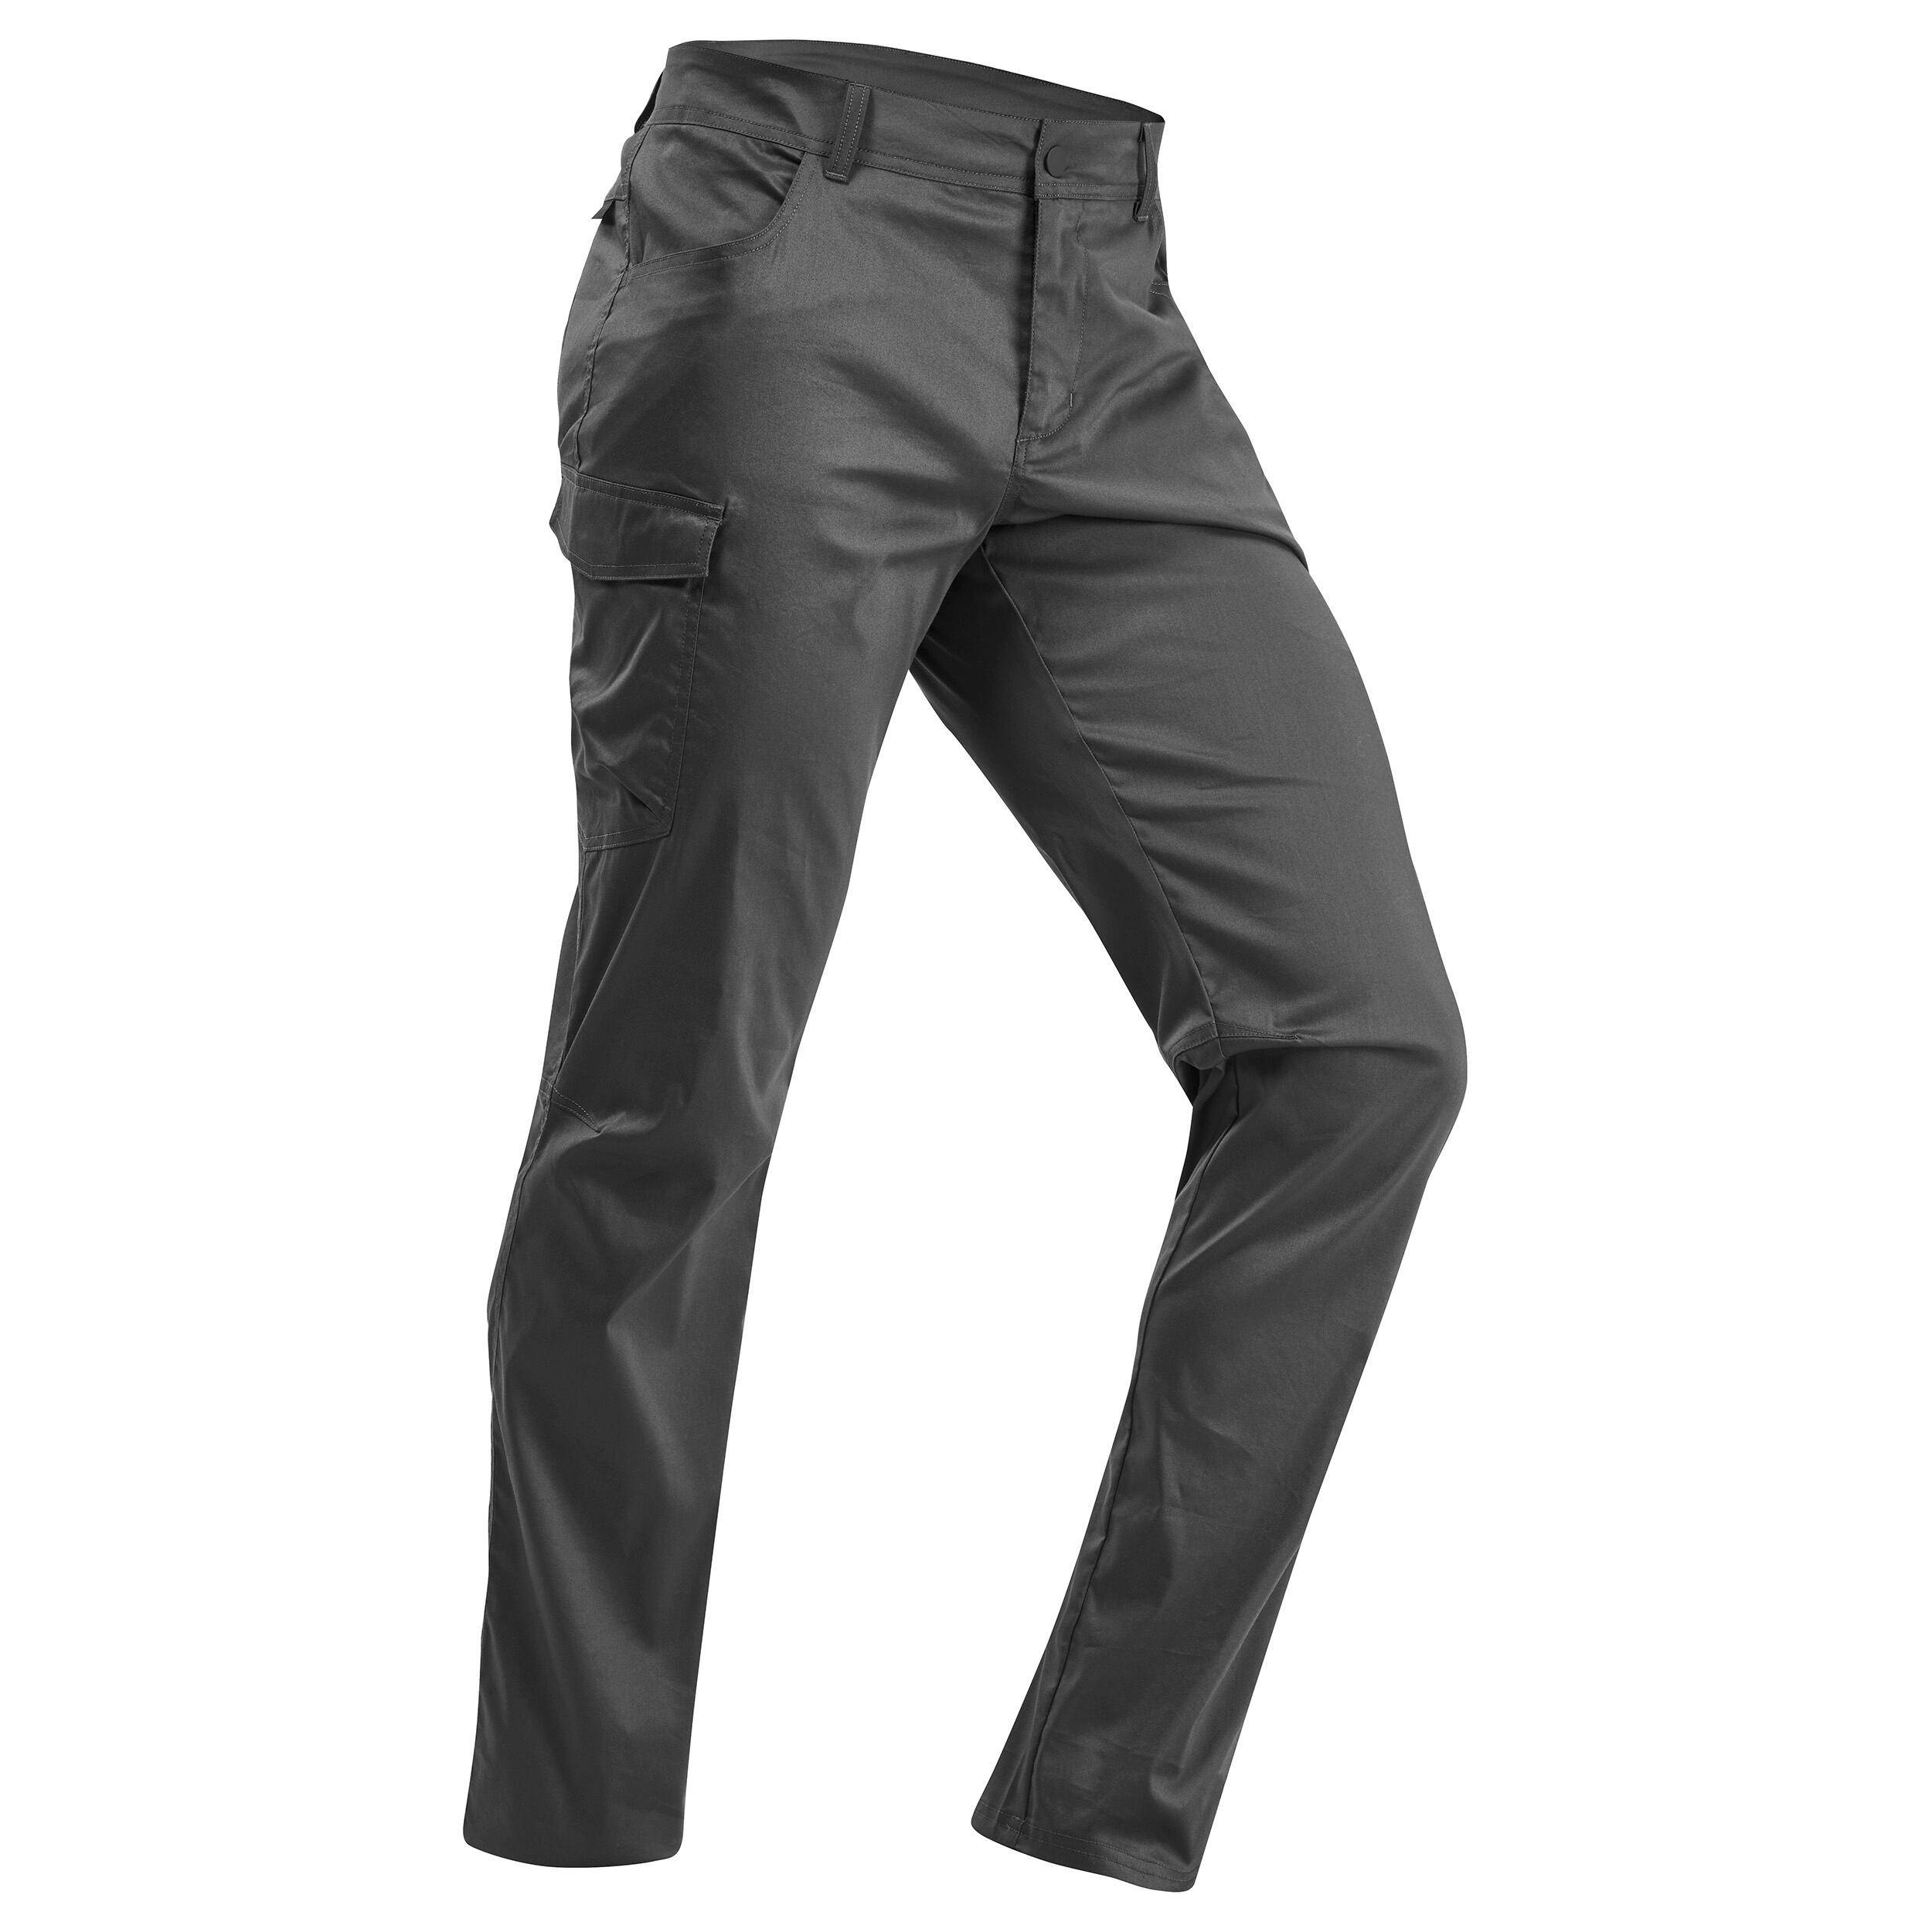 485794 Trousers Images Stock Photos  Vectors  Shutterstock